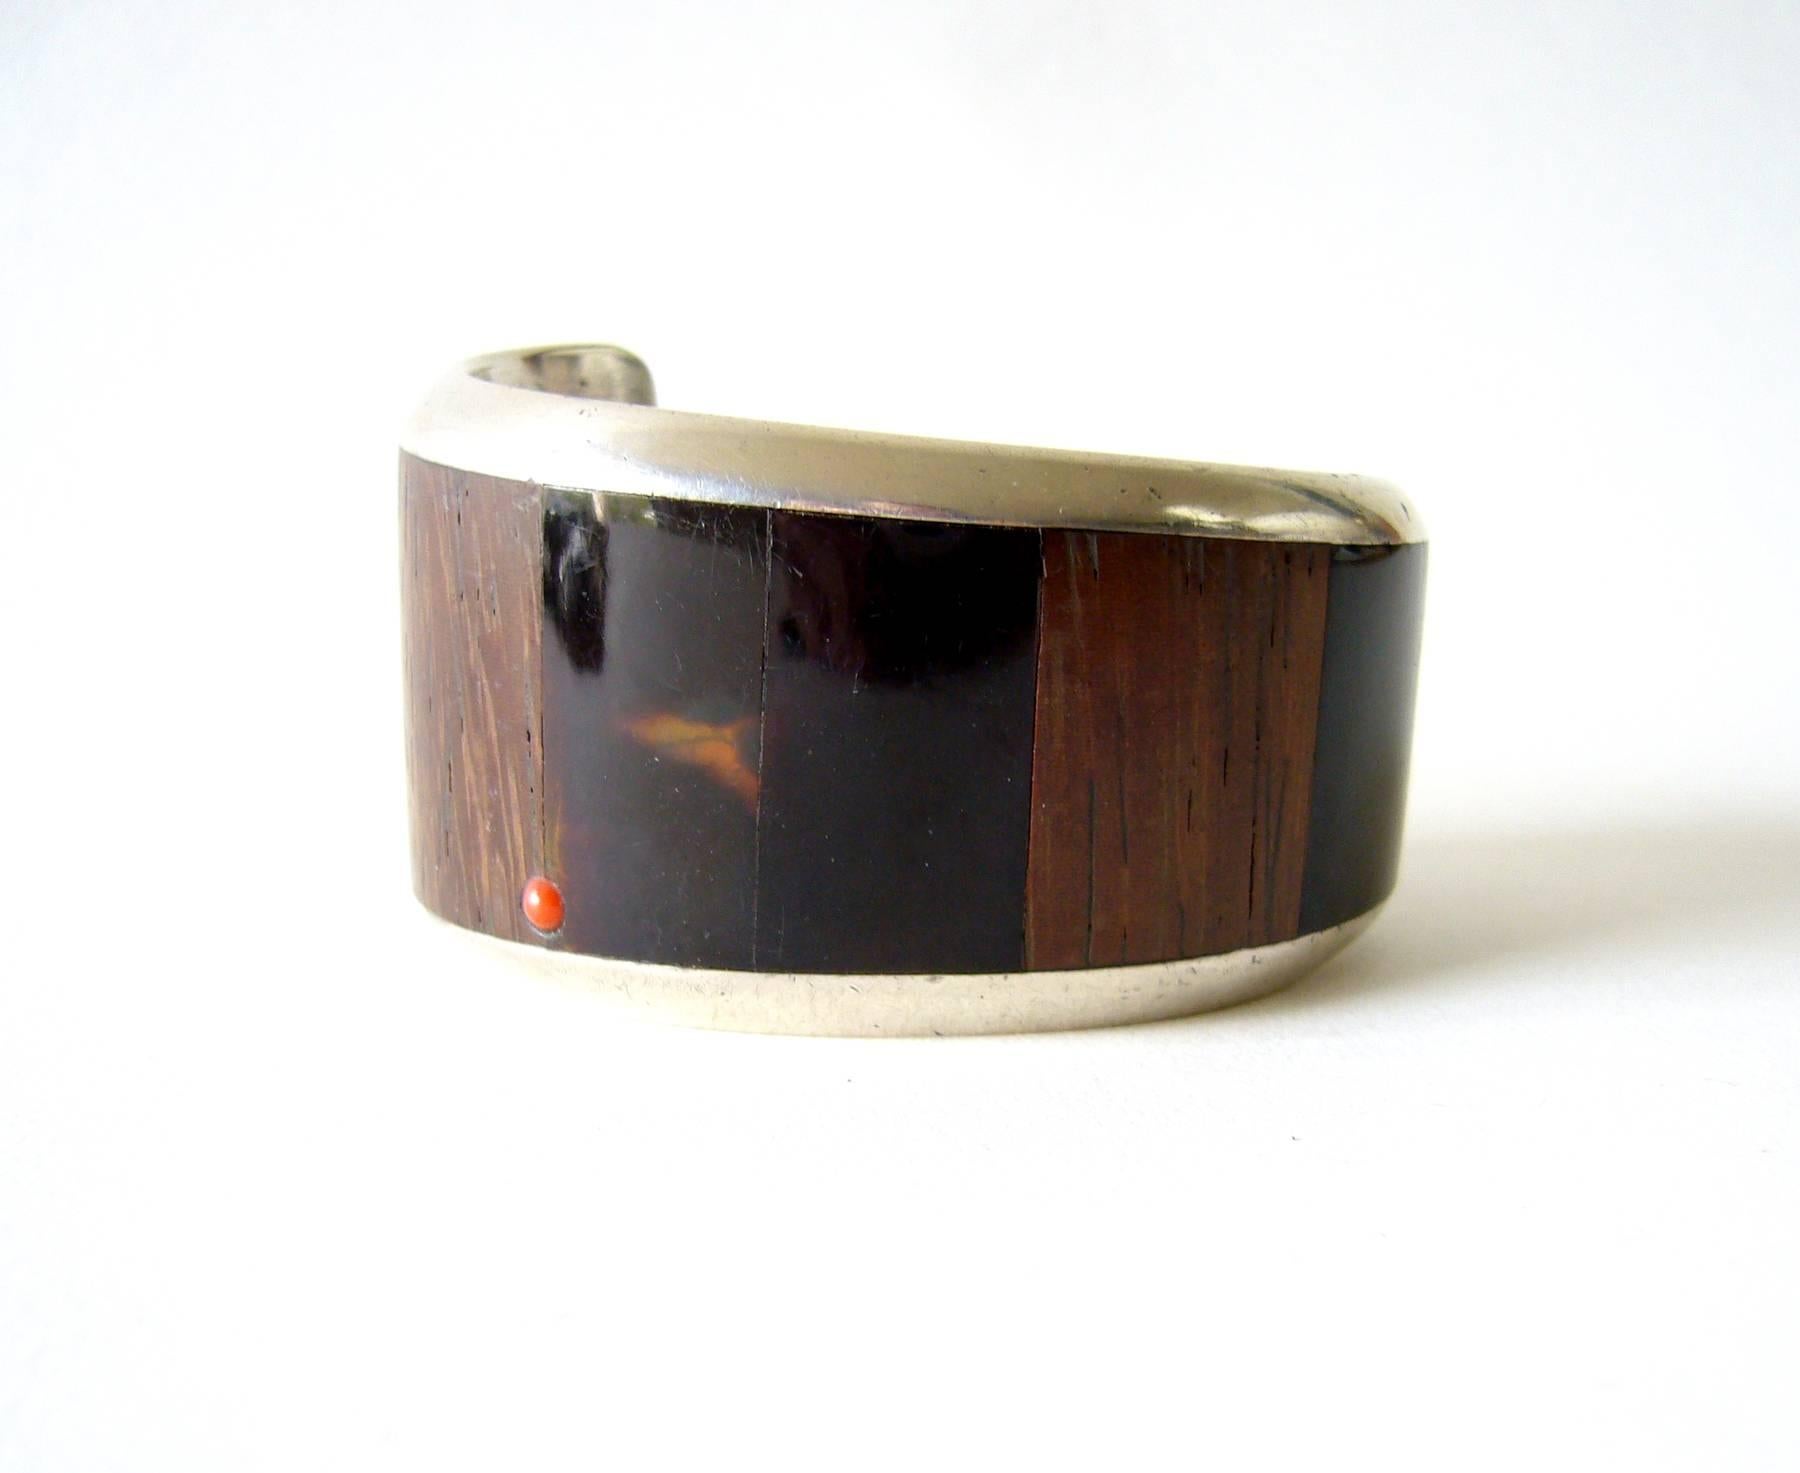 1960's Native American sterling silver cuff bracelet with wood, shell inlay and coral cab accent.  Bracelet has the influence of Hopi jeweler, Charles Loloma. It has an inner circumference measurement of 5.25